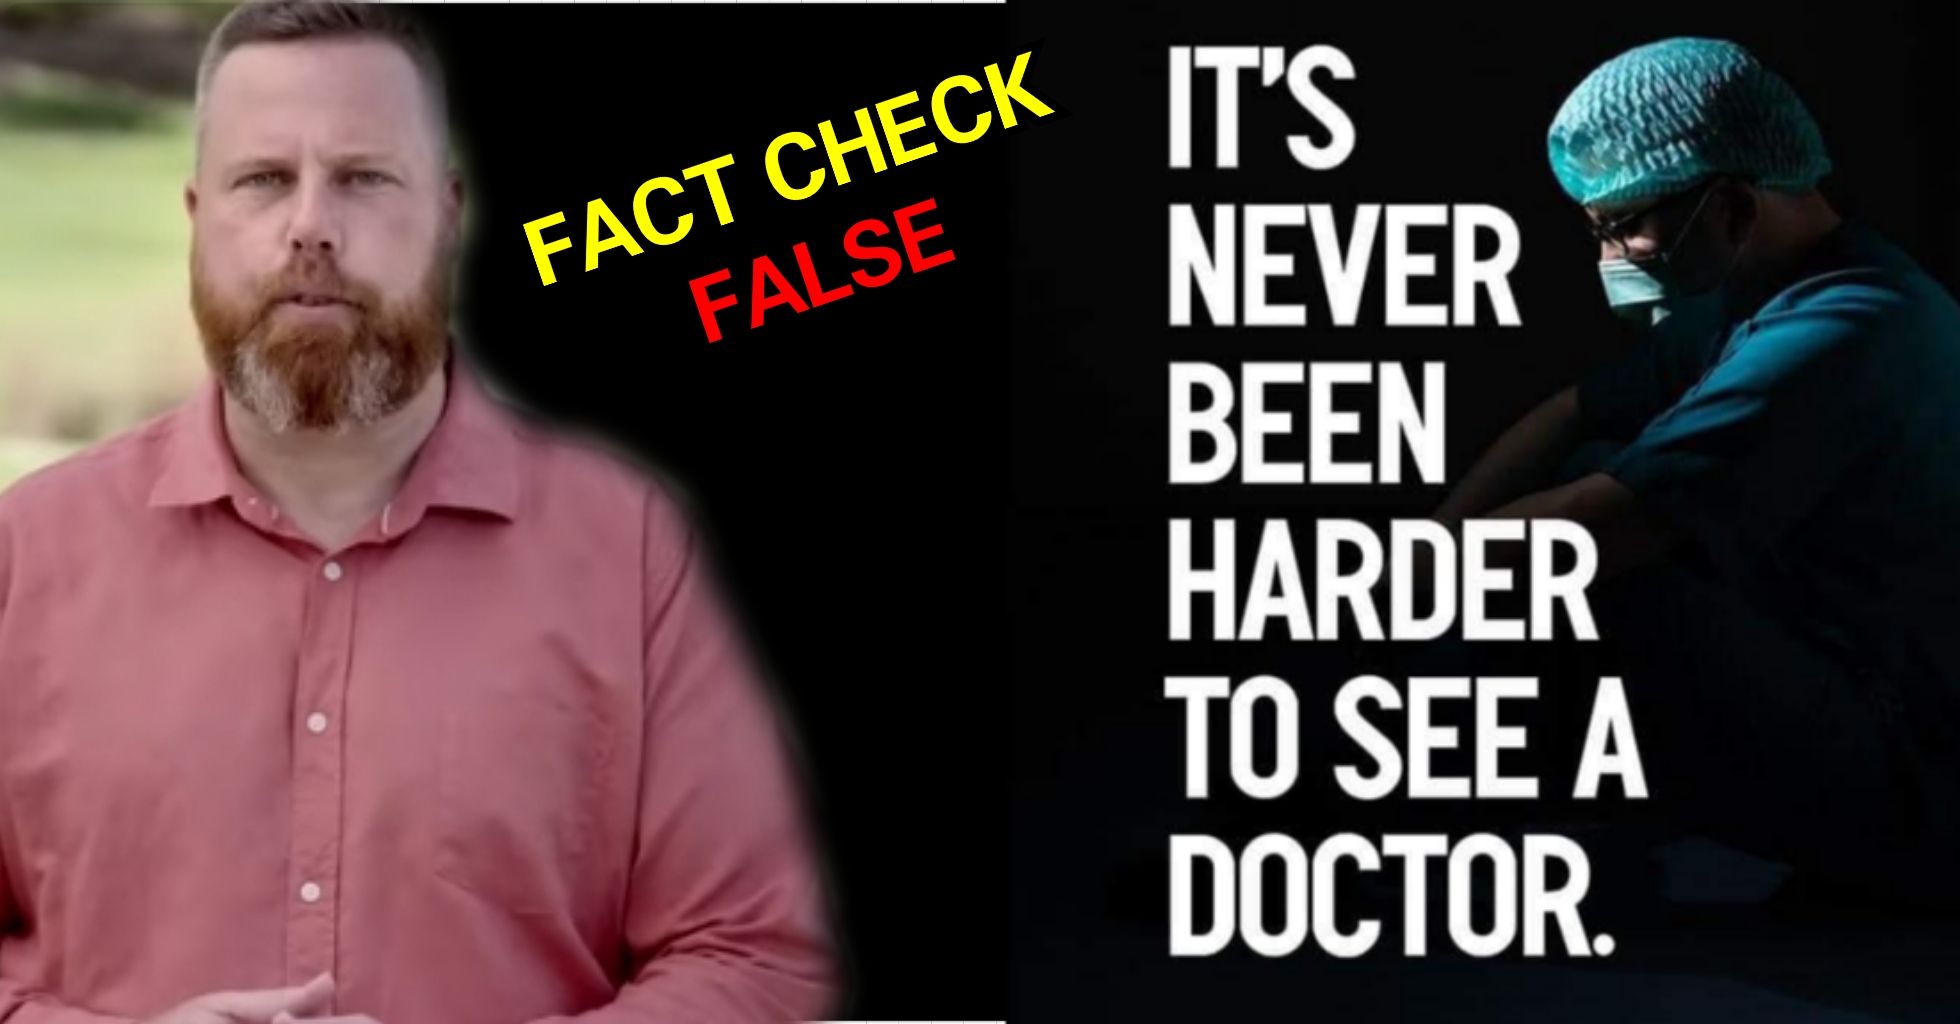 You are currently viewing Dan Repacholi Fact Checked – It’s never been harder to see a doctor.